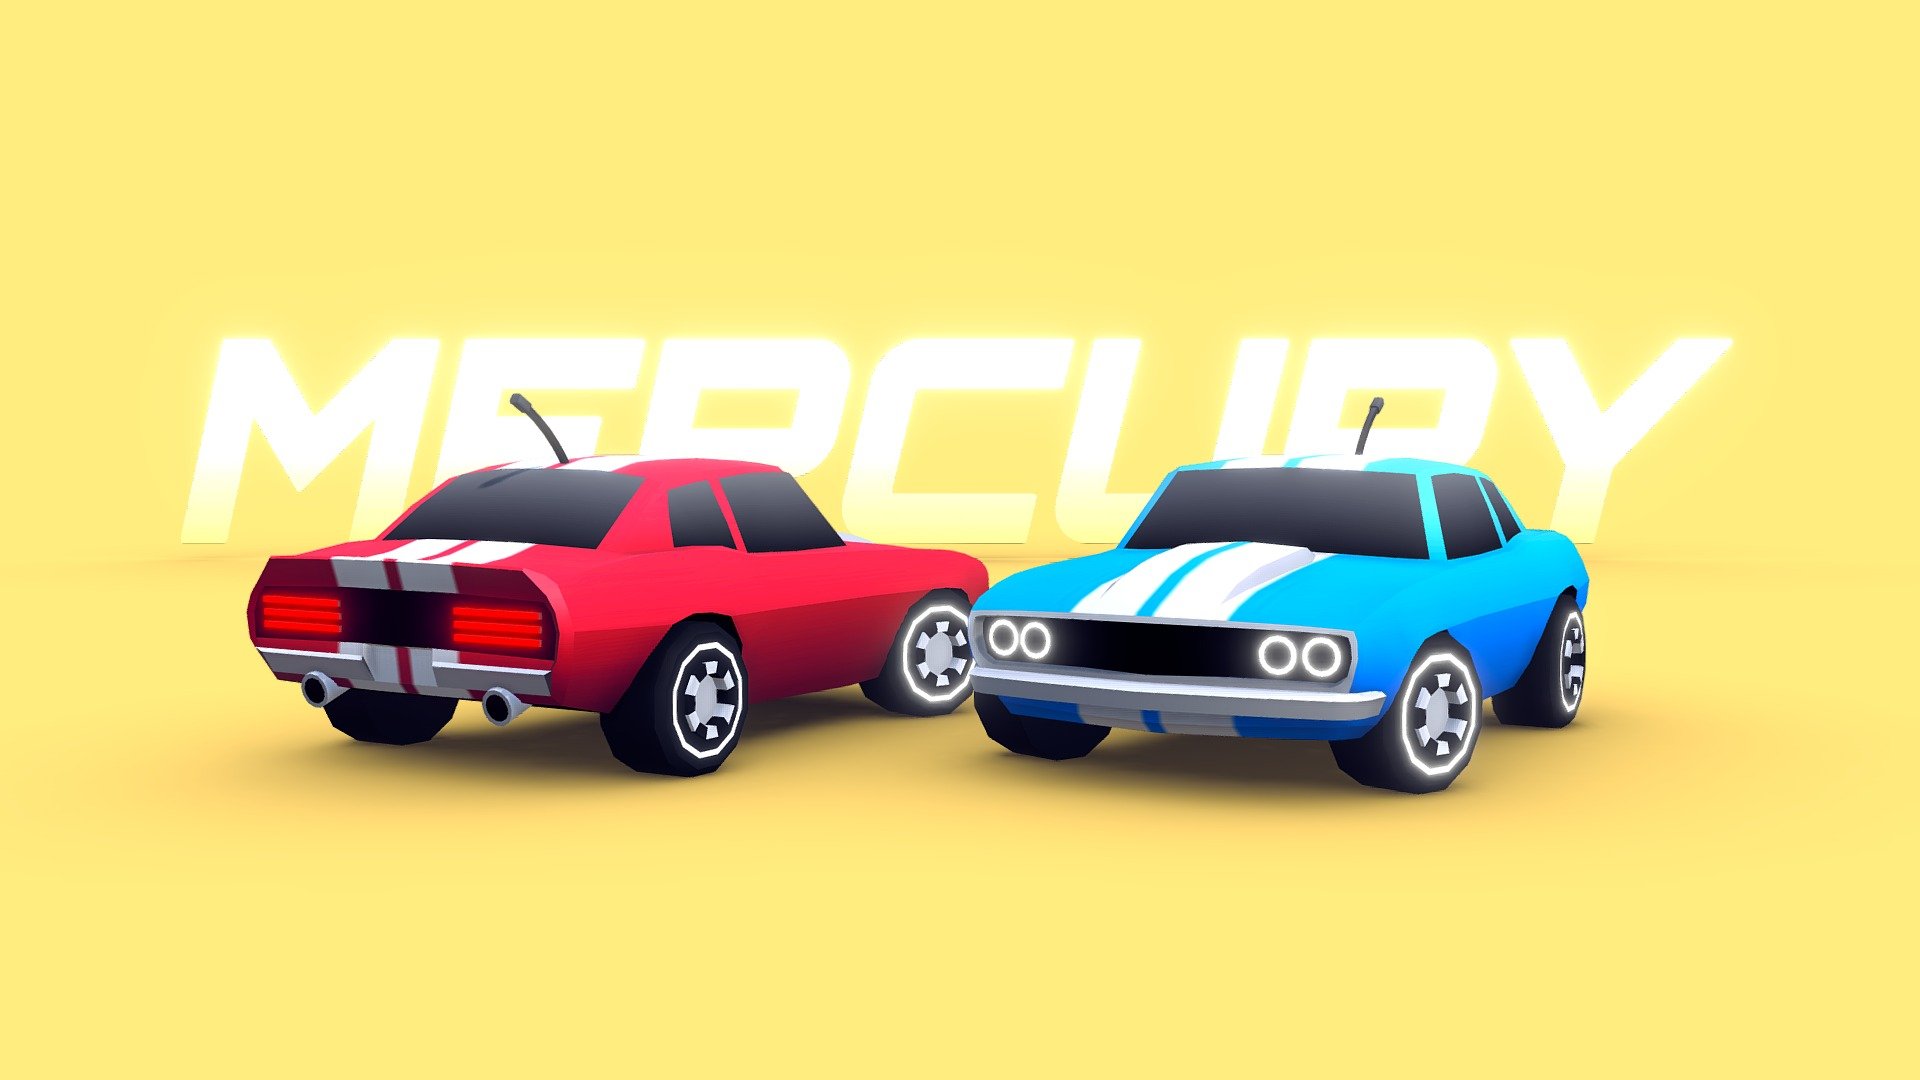 This car is going to be added to TURBO: Cartoon Racing Cars. This update will be dropped on both Unity and Sketchfab very soon!.

I hope you like it.

Best regards, Mena 3d model